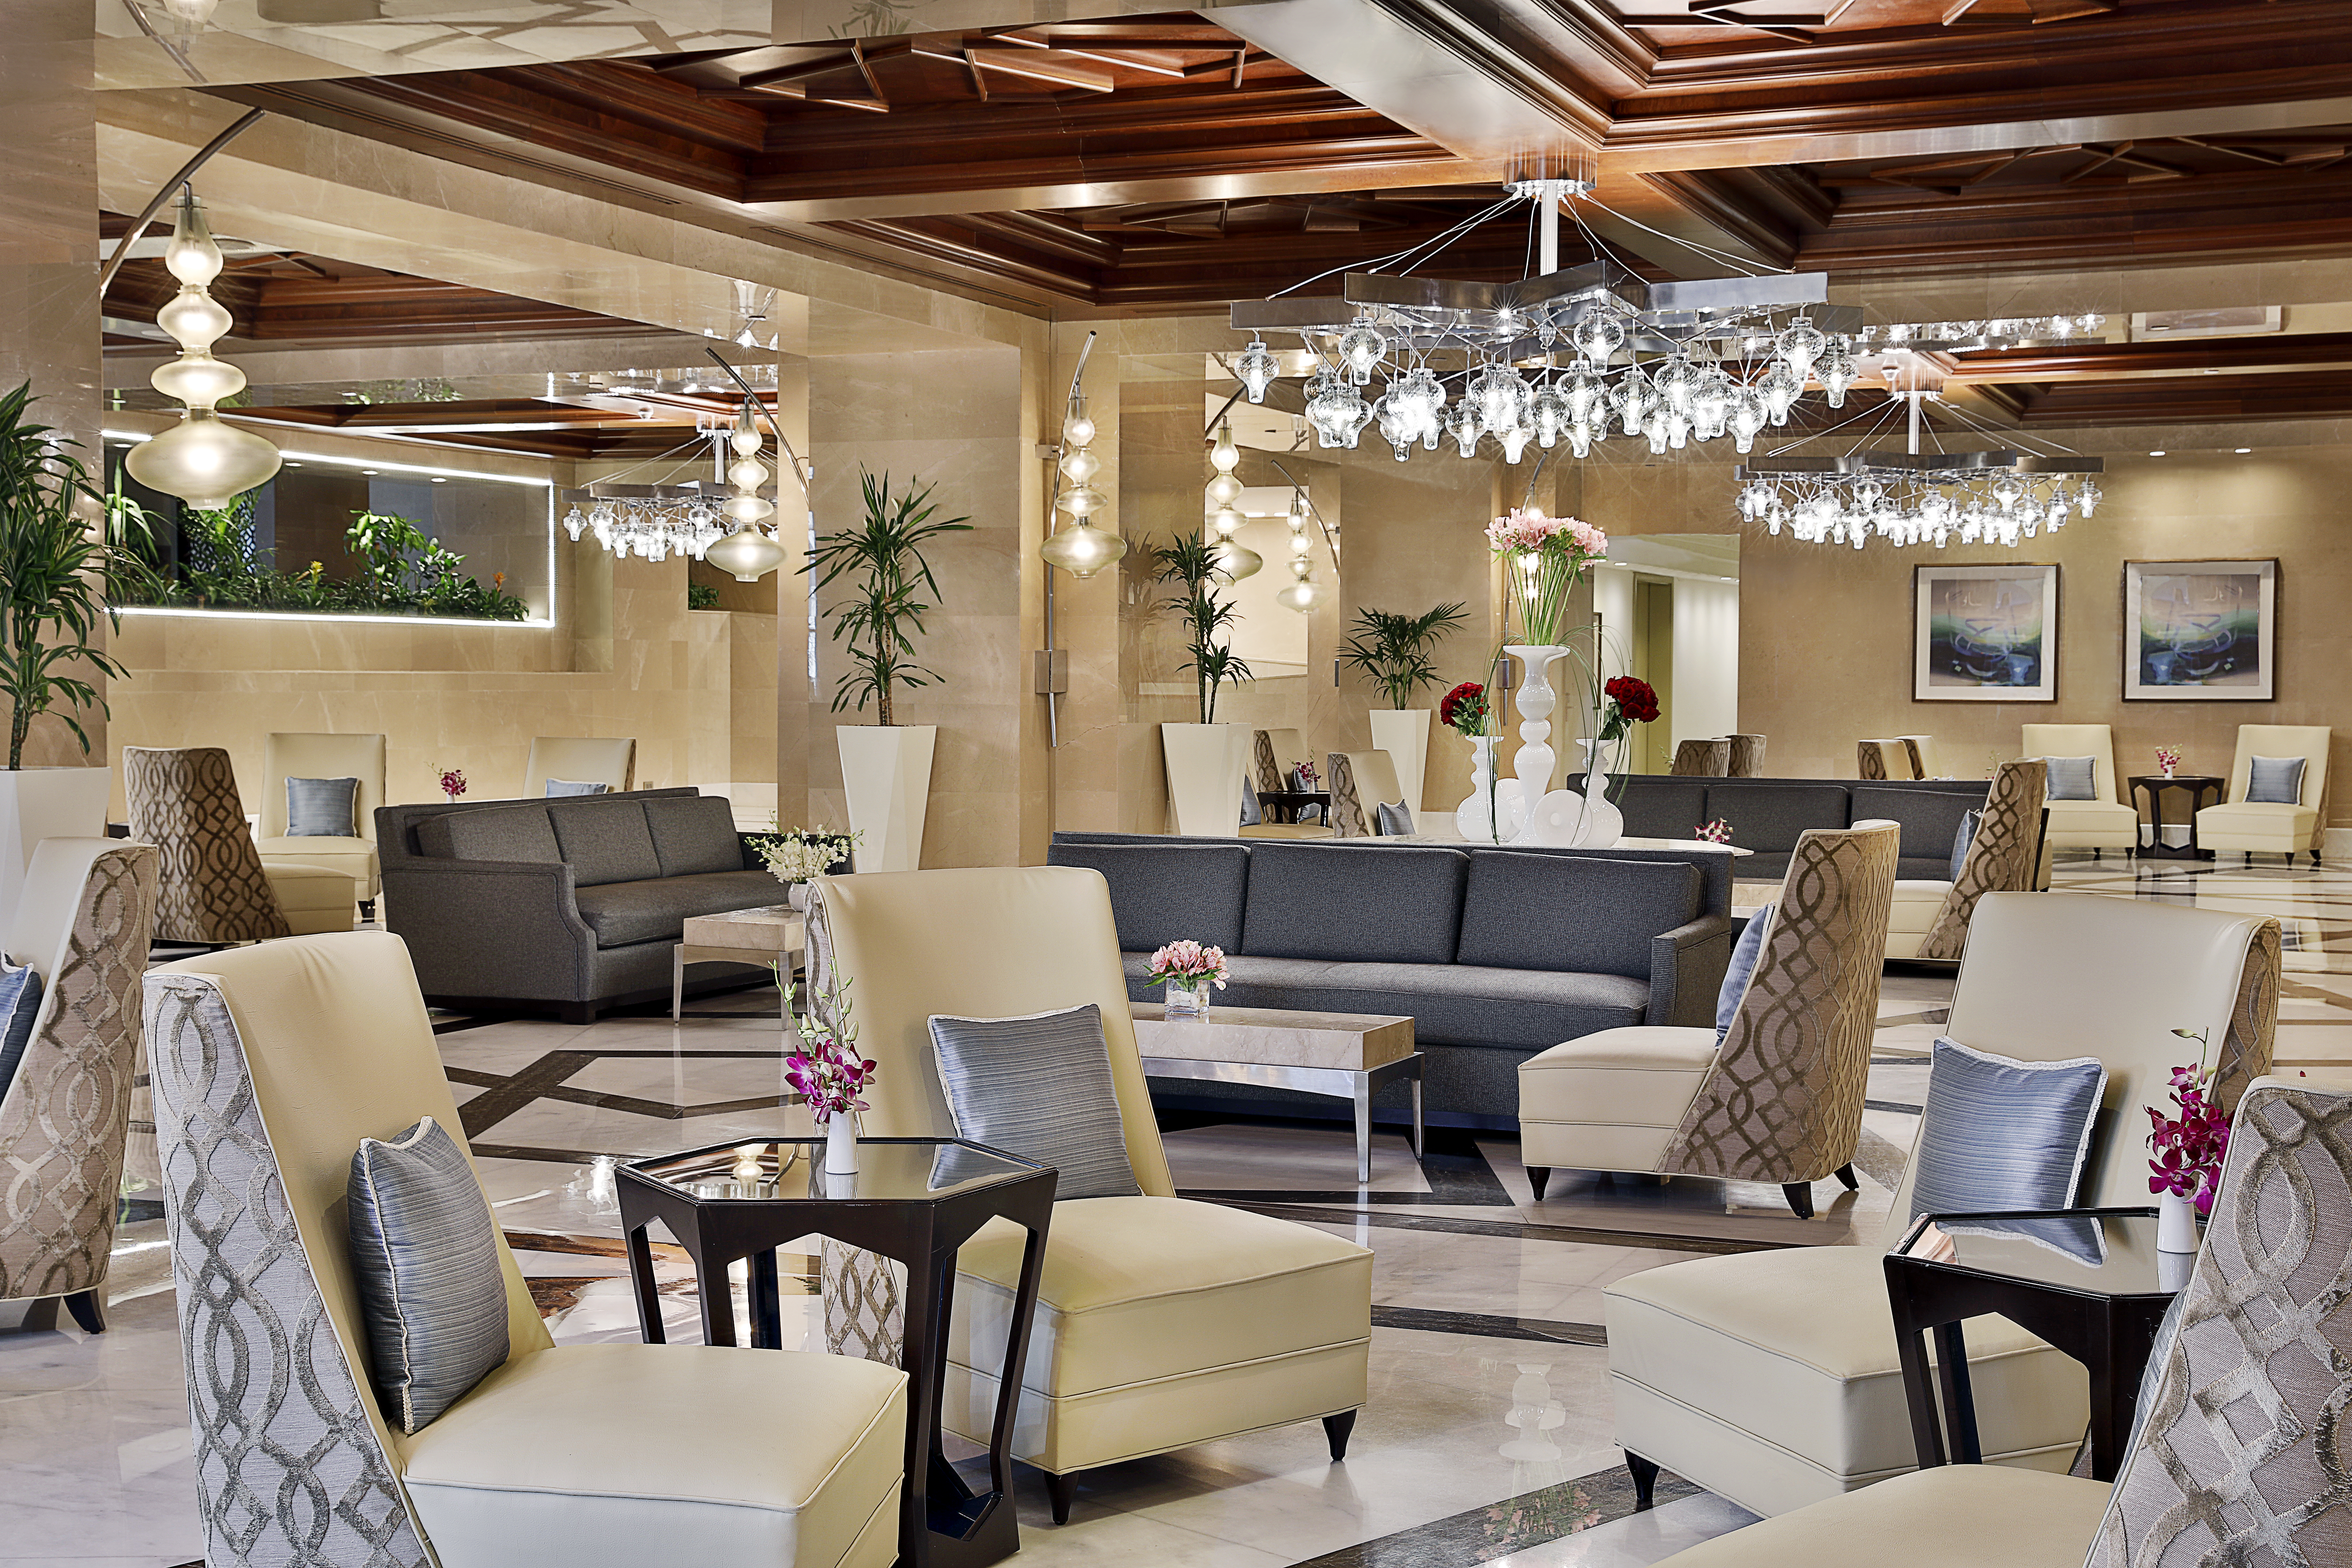 Hotel Lobby Seating Area with Chairs, Tables and Sofa